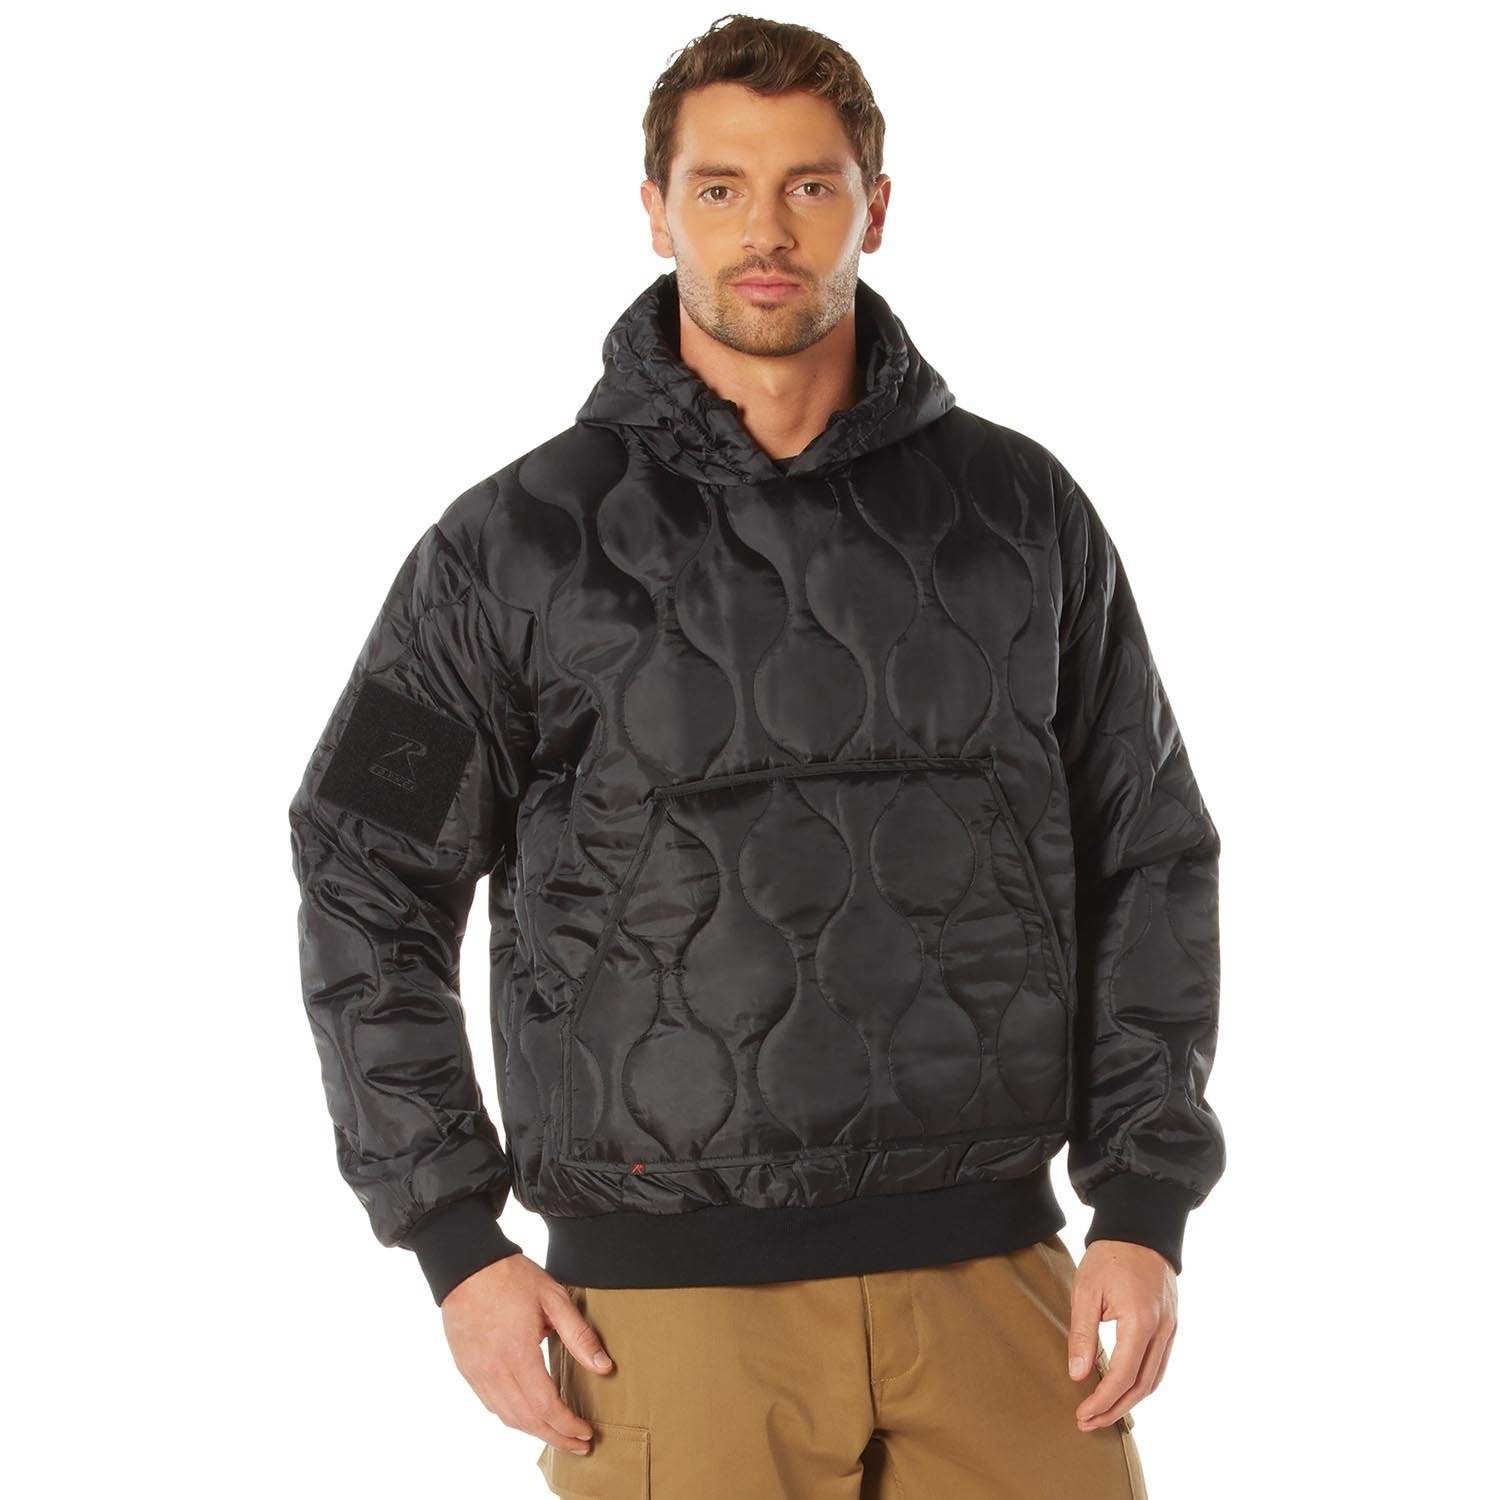 ROTHCO QUILTED WOOBIE HOODED SWEATSHIRT